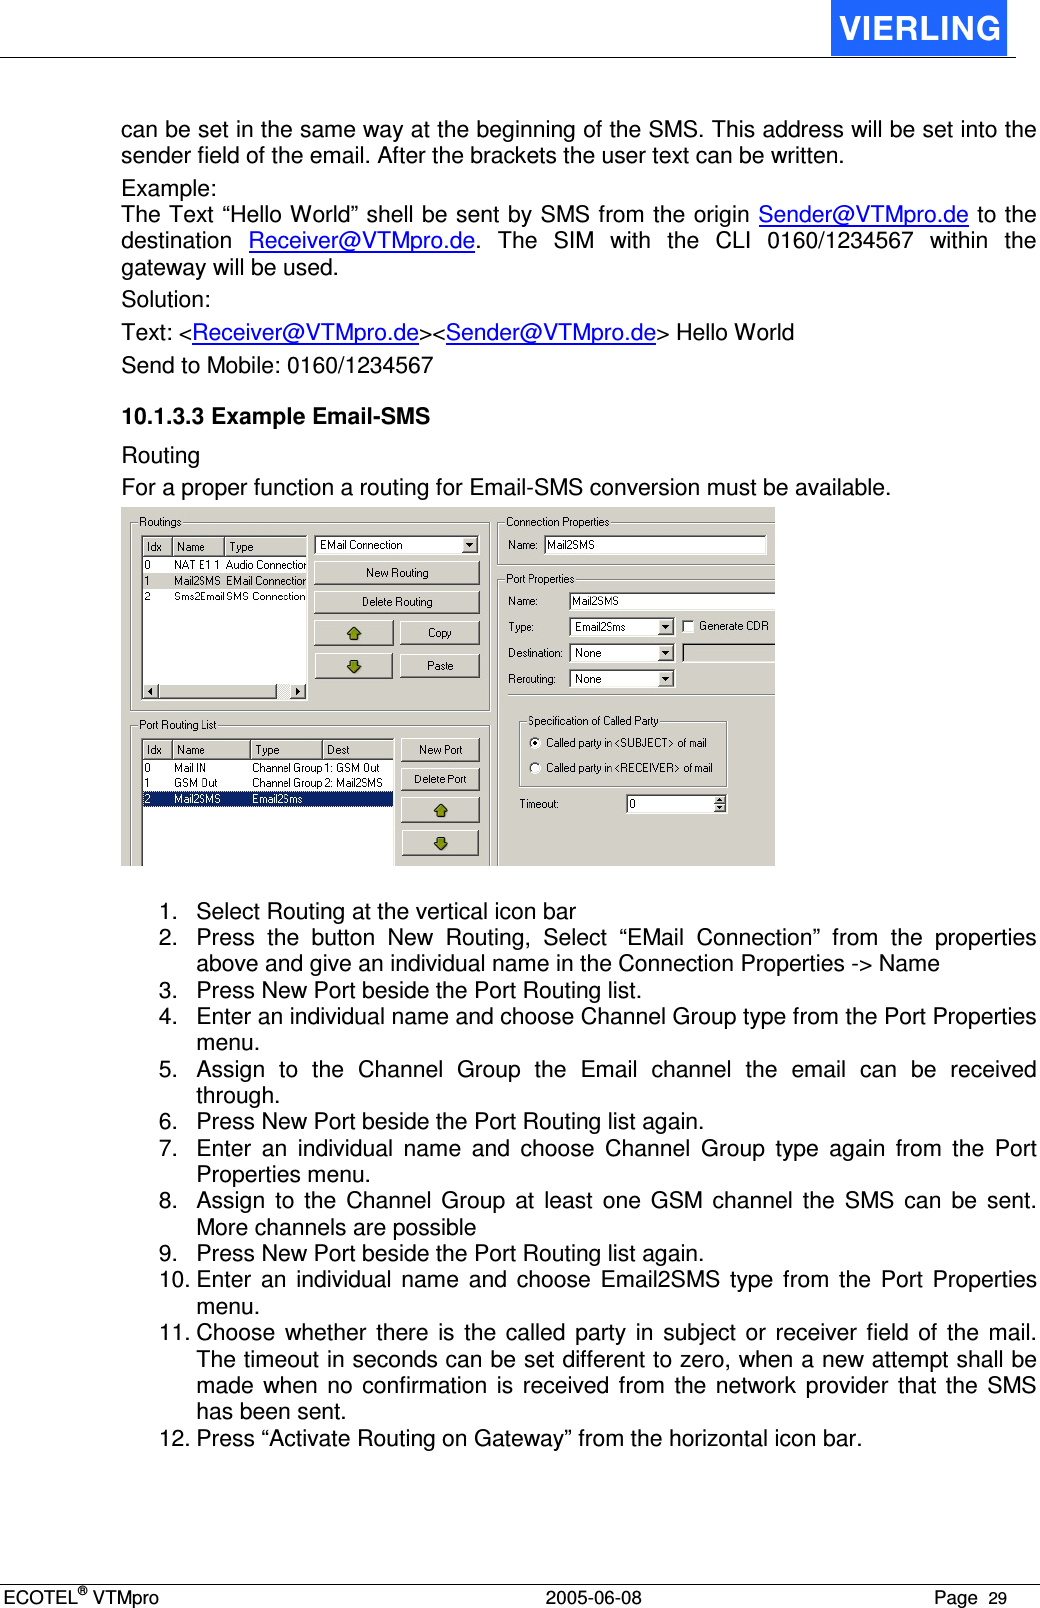 ECOTEL® VTMpro  2005-06-08 Page  29    can be set in the same way at the beginning of the SMS. This address will be set into the sender field of the email. After the brackets the user text can be written. Example:  The Text “Hello World” shell be sent by SMS from the origin Sender@VTMpro.de to the destination  Receiver@VTMpro.de.  The  SIM  with  the  CLI  0160/1234567  within  the gateway will be used. Solution: Text: &lt;Receiver@VTMpro.de&gt;&lt;Sender@VTMpro.de&gt; Hello World Send to Mobile: 0160/1234567 10.1.3.3 Example Email-SMS Routing For a proper function a routing for Email-SMS conversion must be available.   1.  Select Routing at the vertical icon bar 2.  Press  the  button  New  Routing,  Select  “EMail  Connection”  from  the  properties above and give an individual name in the Connection Properties -&gt; Name 3.  Press New Port beside the Port Routing list. 4.  Enter an individual name and choose Channel Group type from the Port Properties menu. 5.  Assign  to  the  Channel  Group  the  Email  channel  the  email  can  be  received through. 6.  Press New Port beside the Port Routing list again. 7.  Enter  an  individual  name  and  choose  Channel  Group  type  again  from  the  Port Properties menu. 8.  Assign  to  the  Channel  Group  at  least  one  GSM  channel  the  SMS  can  be  sent. More channels are possible 9.  Press New Port beside the Port Routing list again. 10. Enter  an  individual  name  and  choose  Email2SMS  type  from  the  Port  Properties menu. 11. Choose  whether  there  is  the  called  party  in  subject  or  receiver field  of  the  mail. The timeout in seconds can be set different to zero, when a new attempt shall be made  when no confirmation  is  received  from the  network  provider  that  the  SMS has been sent. 12. Press “Activate Routing on Gateway” from the horizontal icon bar. 